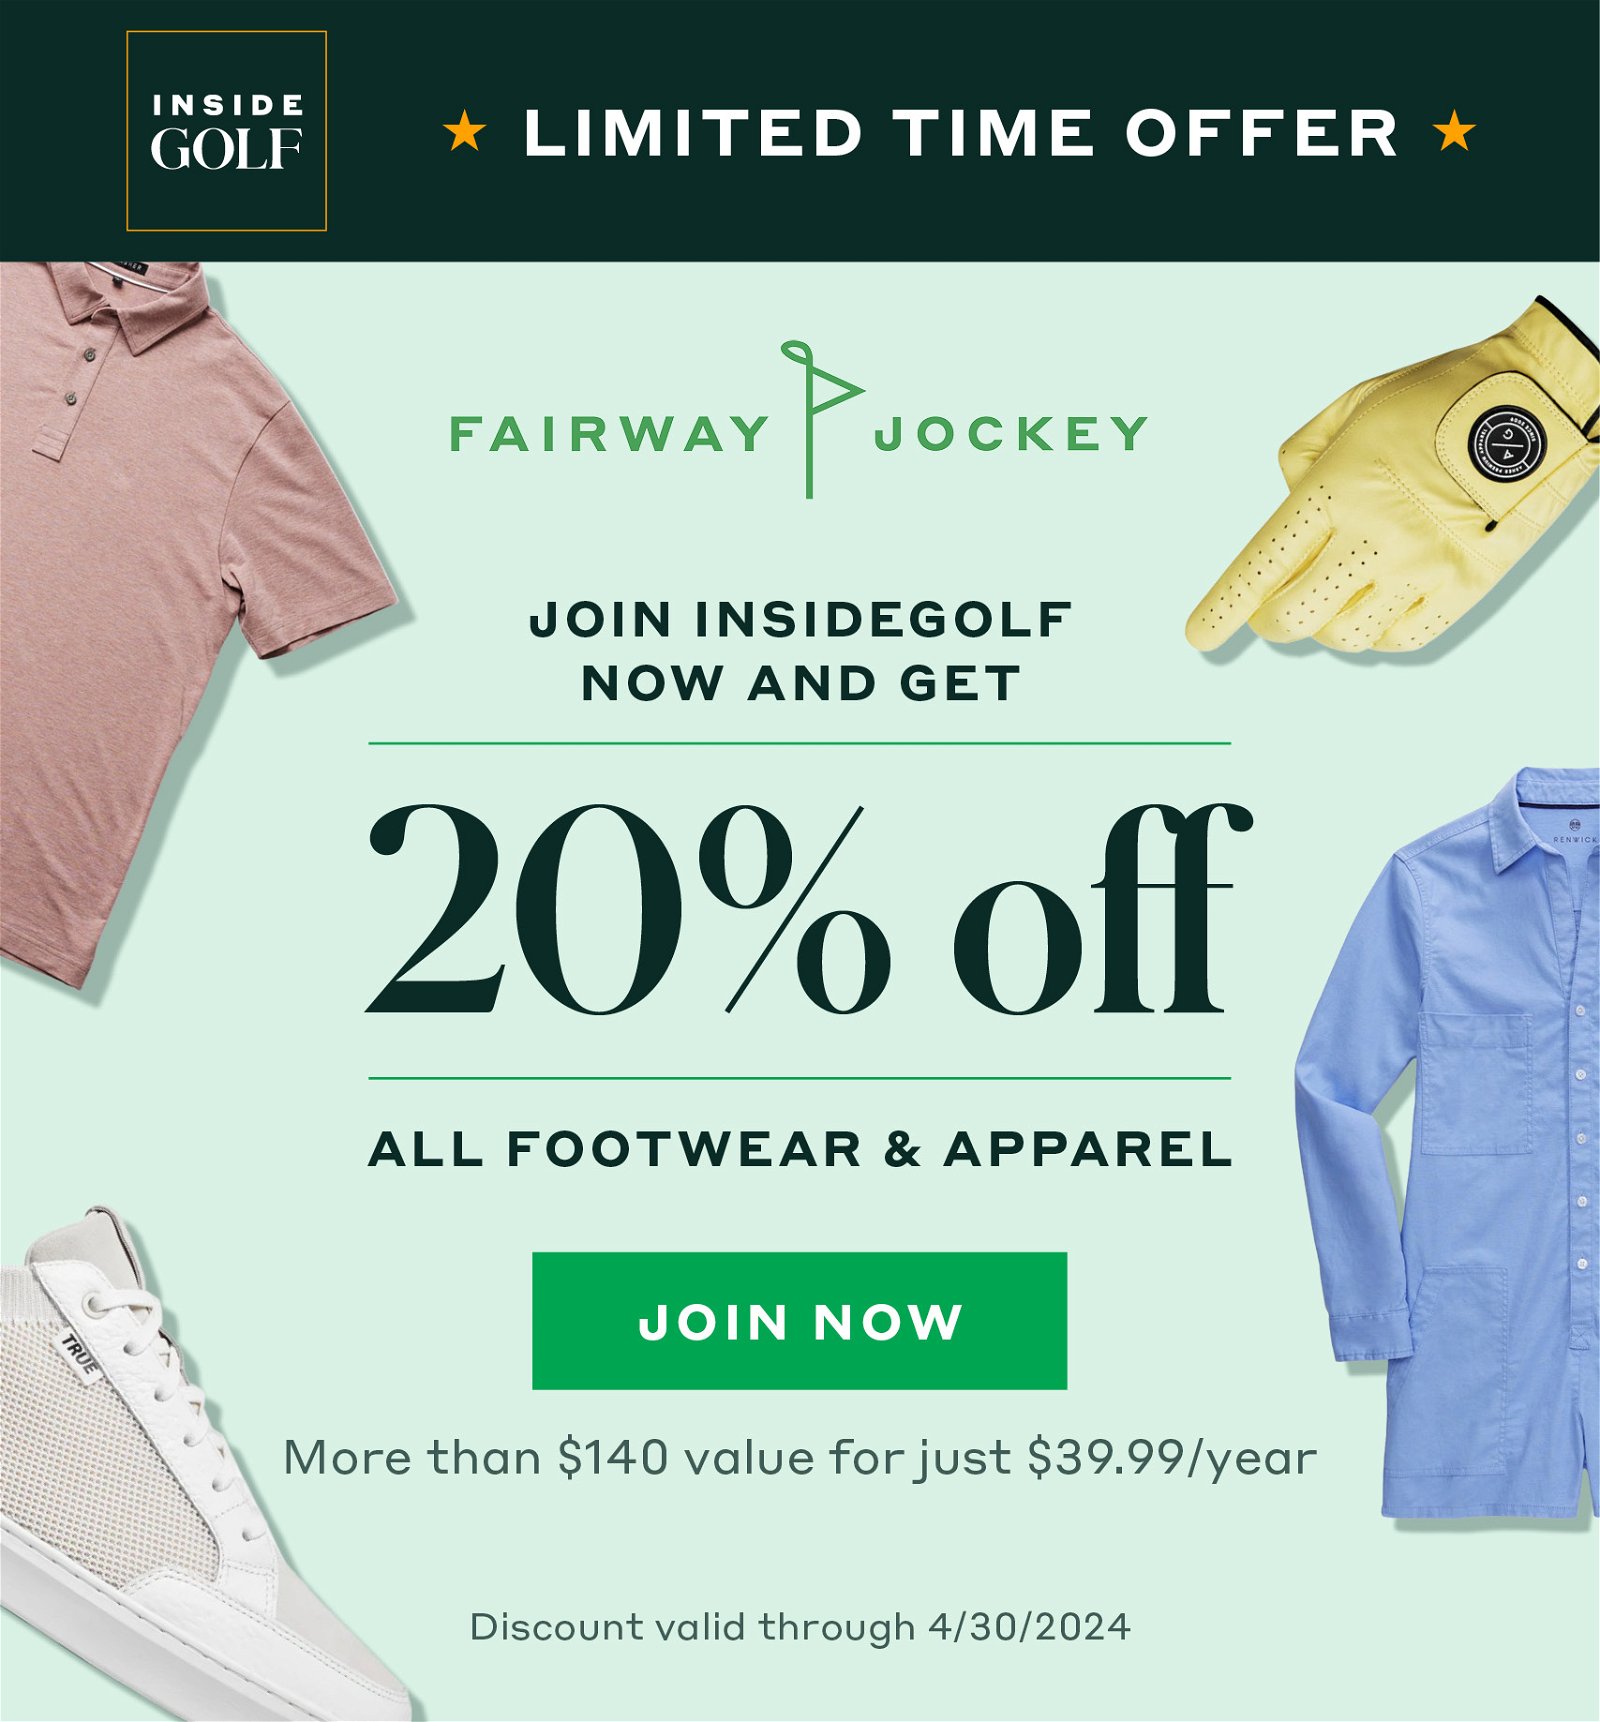 Join InsideGOLF now and ger 20% off all footwear and apparel. JOIN NOW